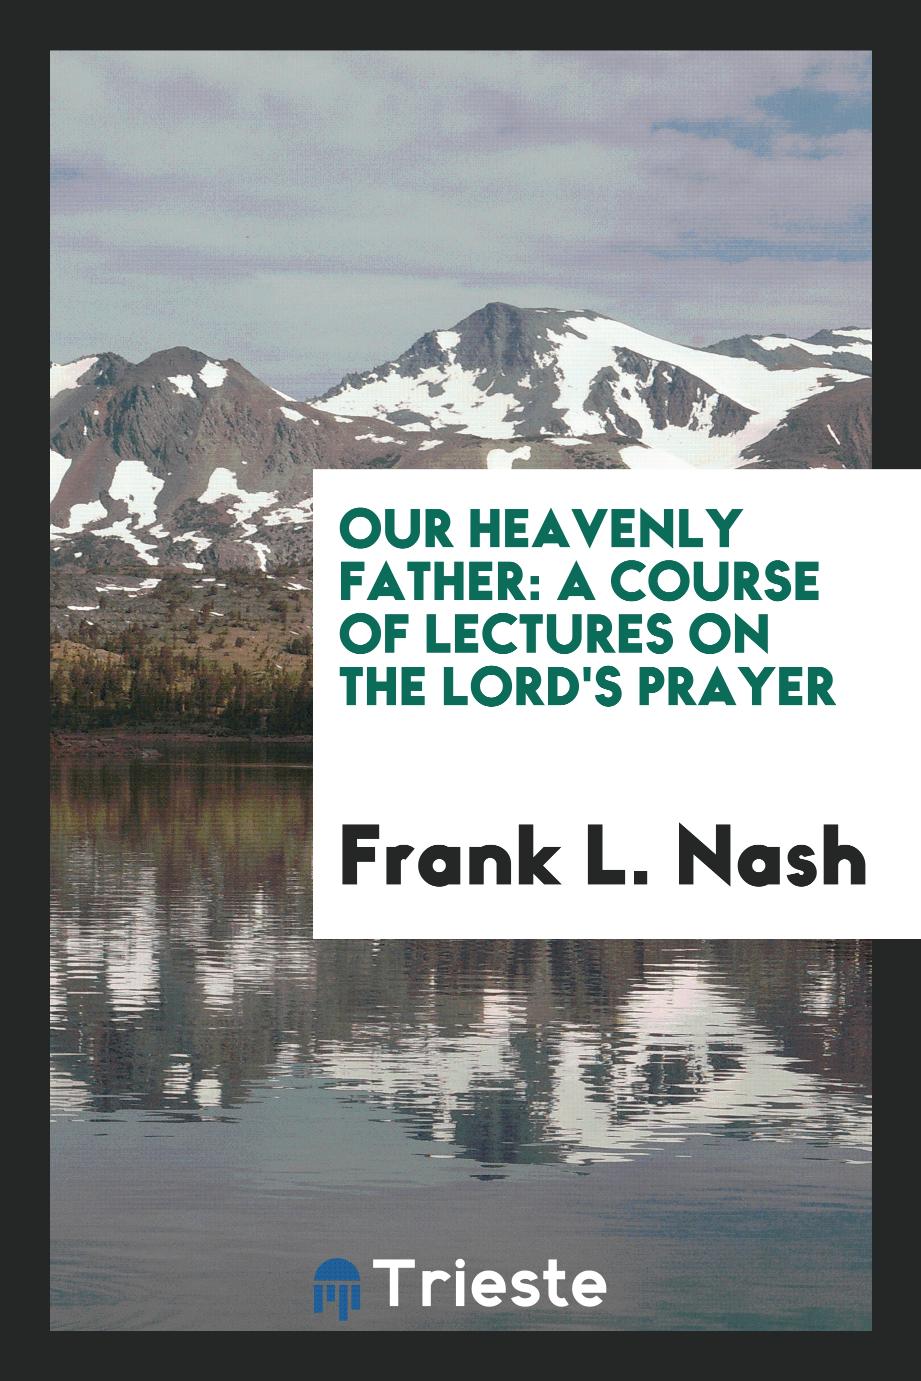 Our Heavenly Father: A Course of Lectures on the Lord's Prayer